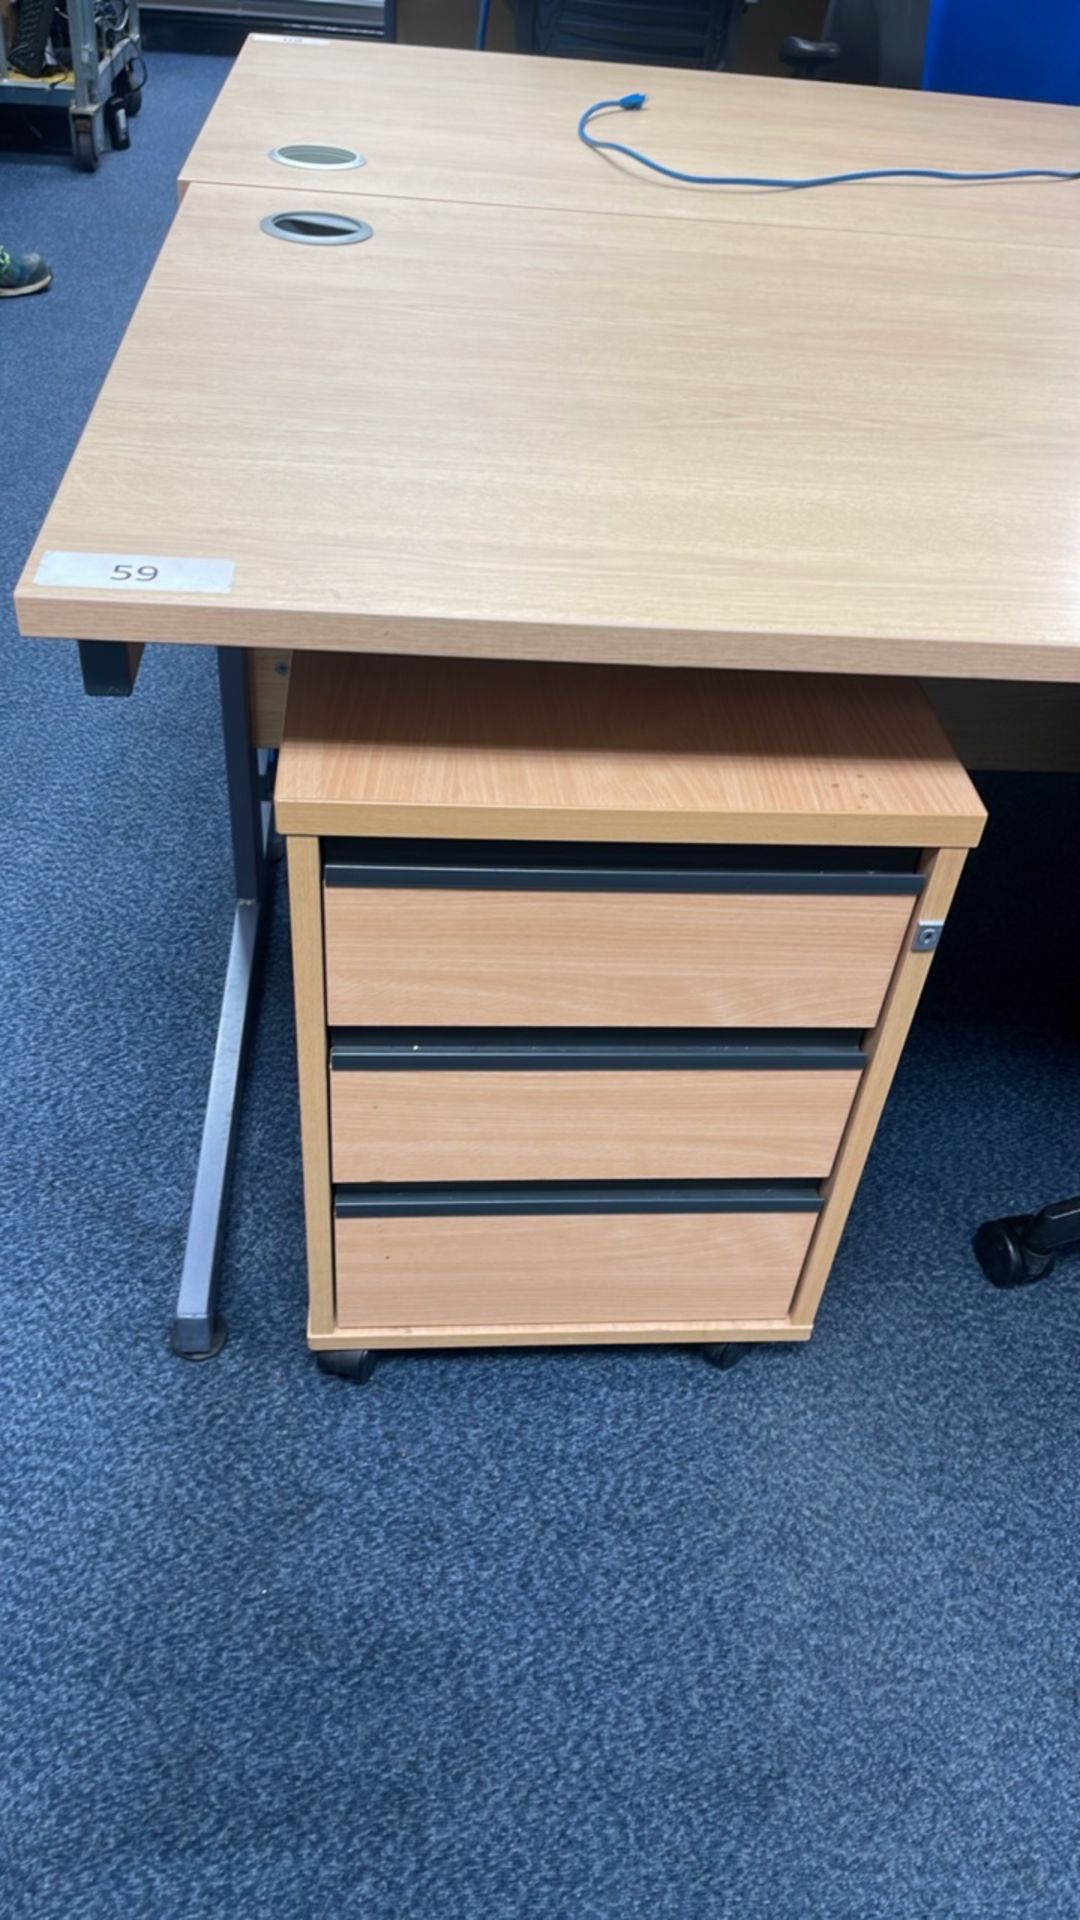 ref 85 - Pair Of Office Desks, Chairs - Image 2 of 7